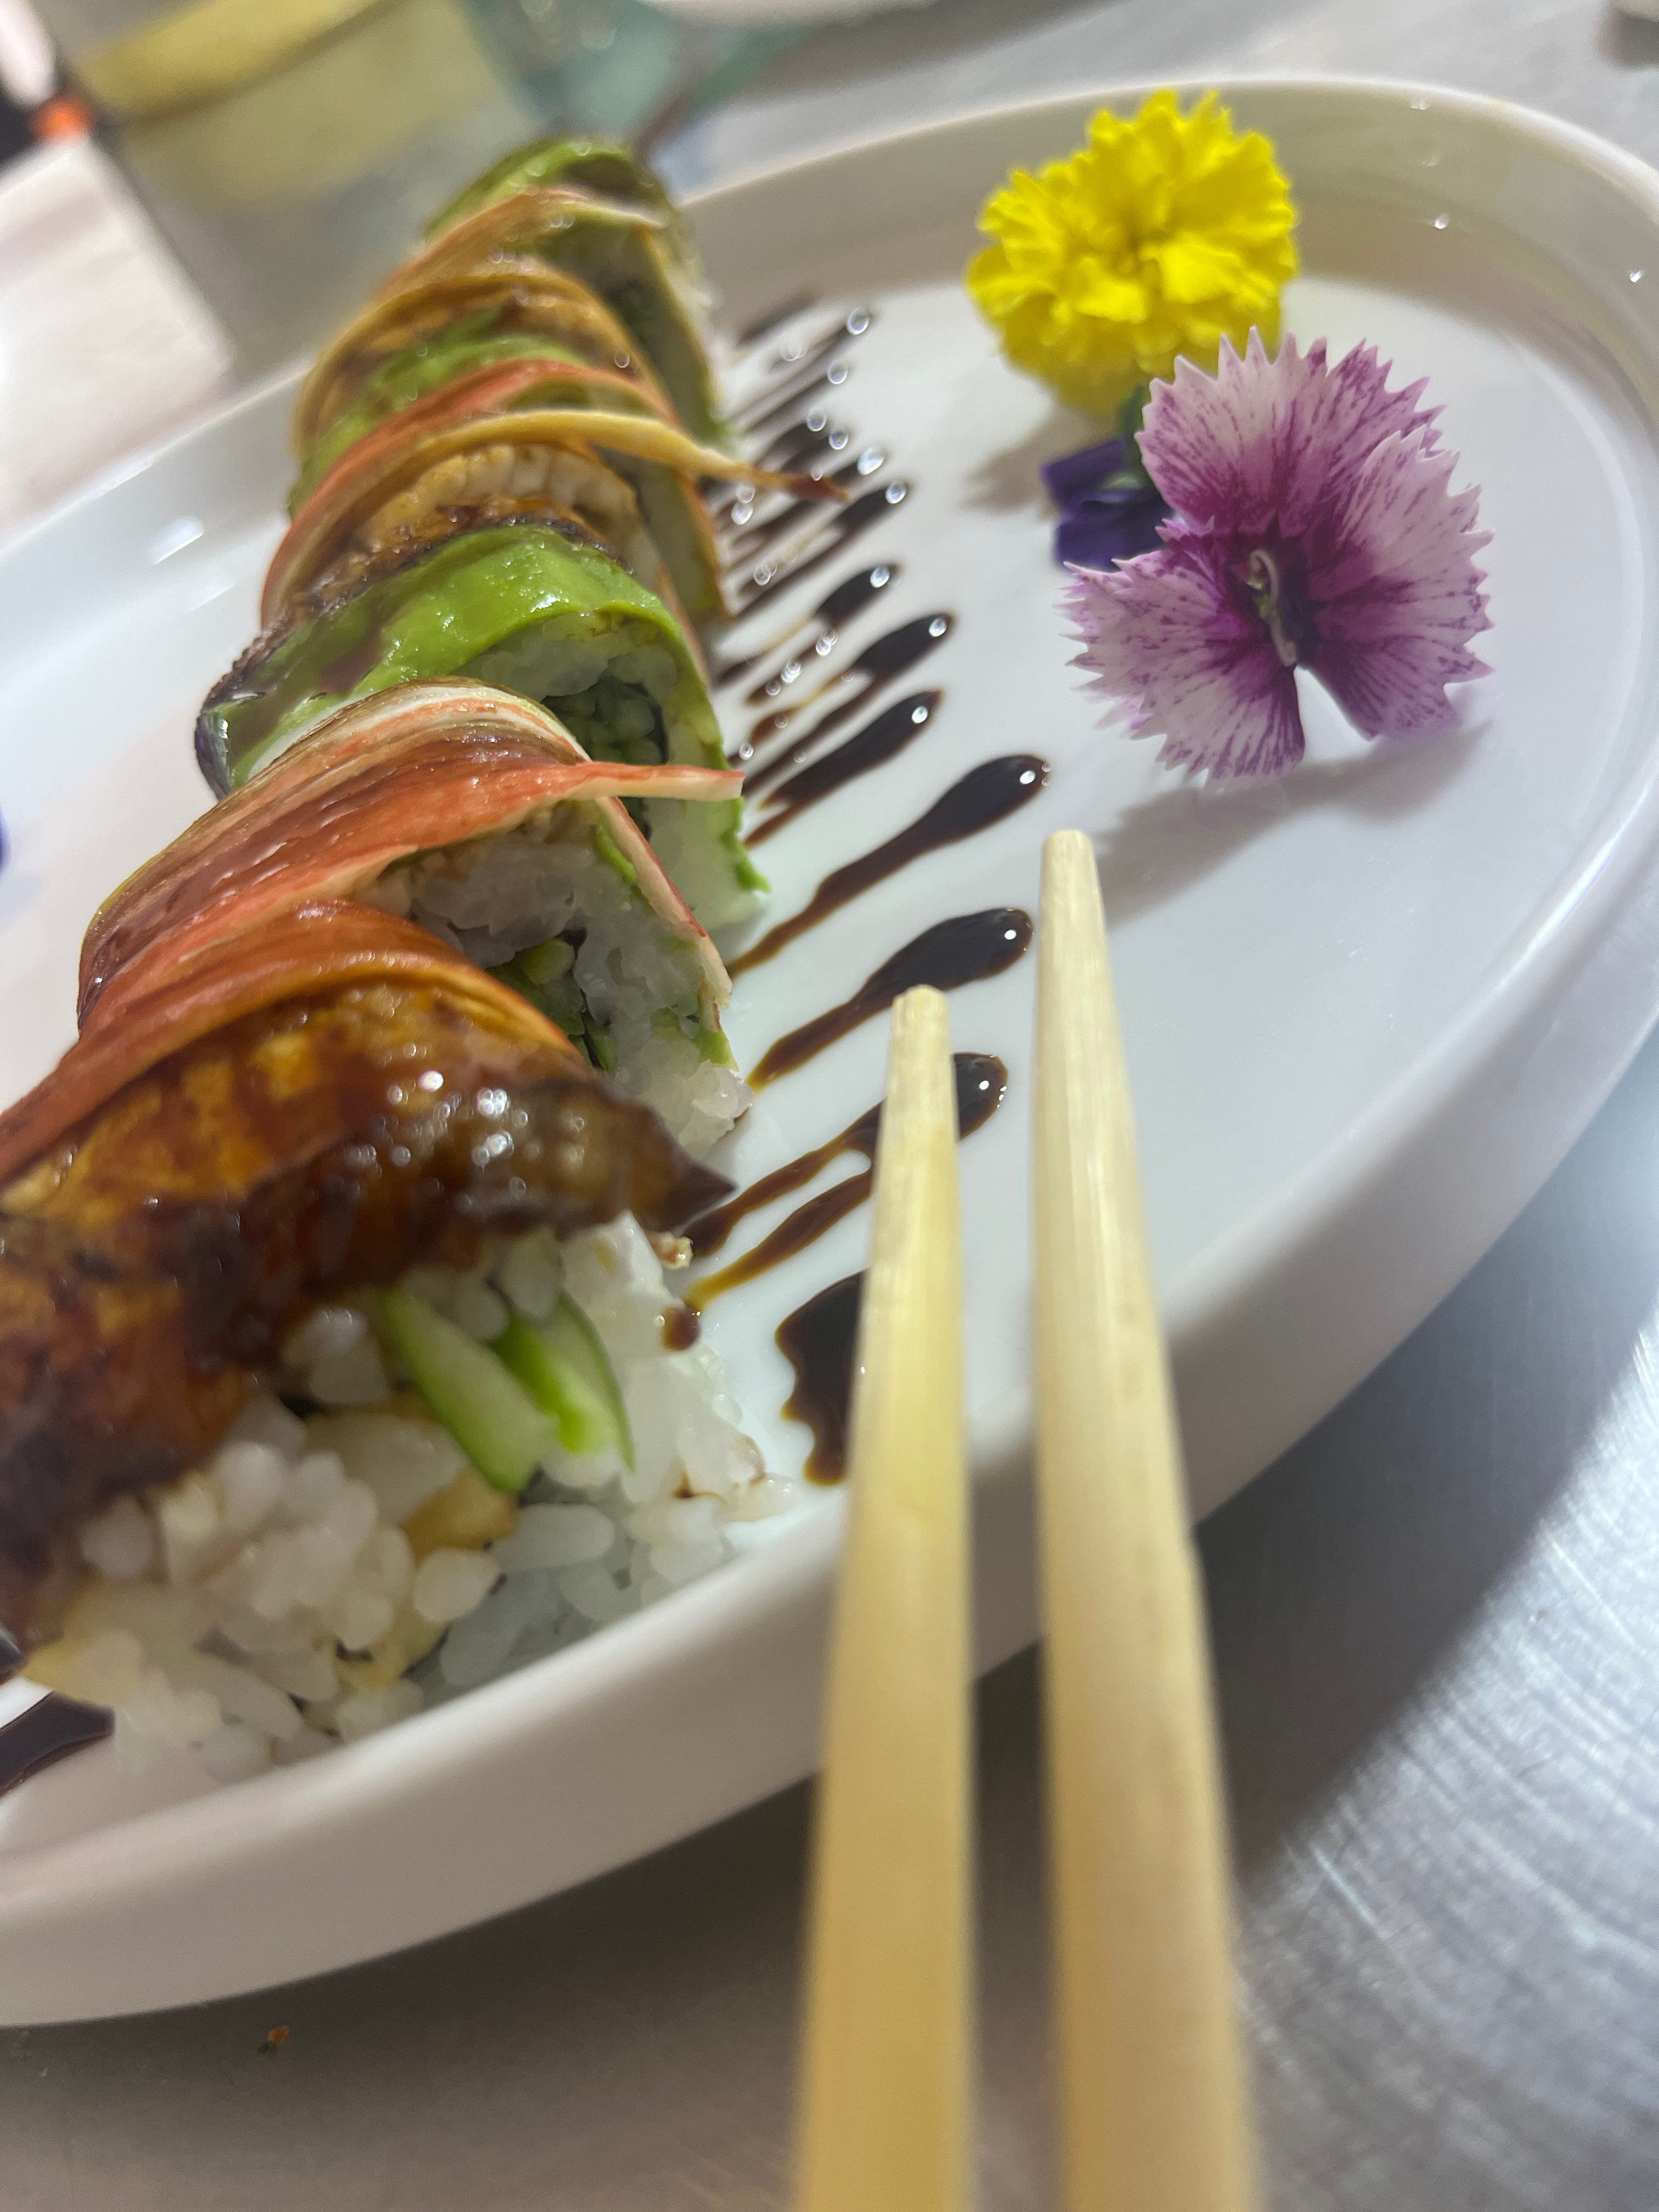 THE DRAGON ROLL